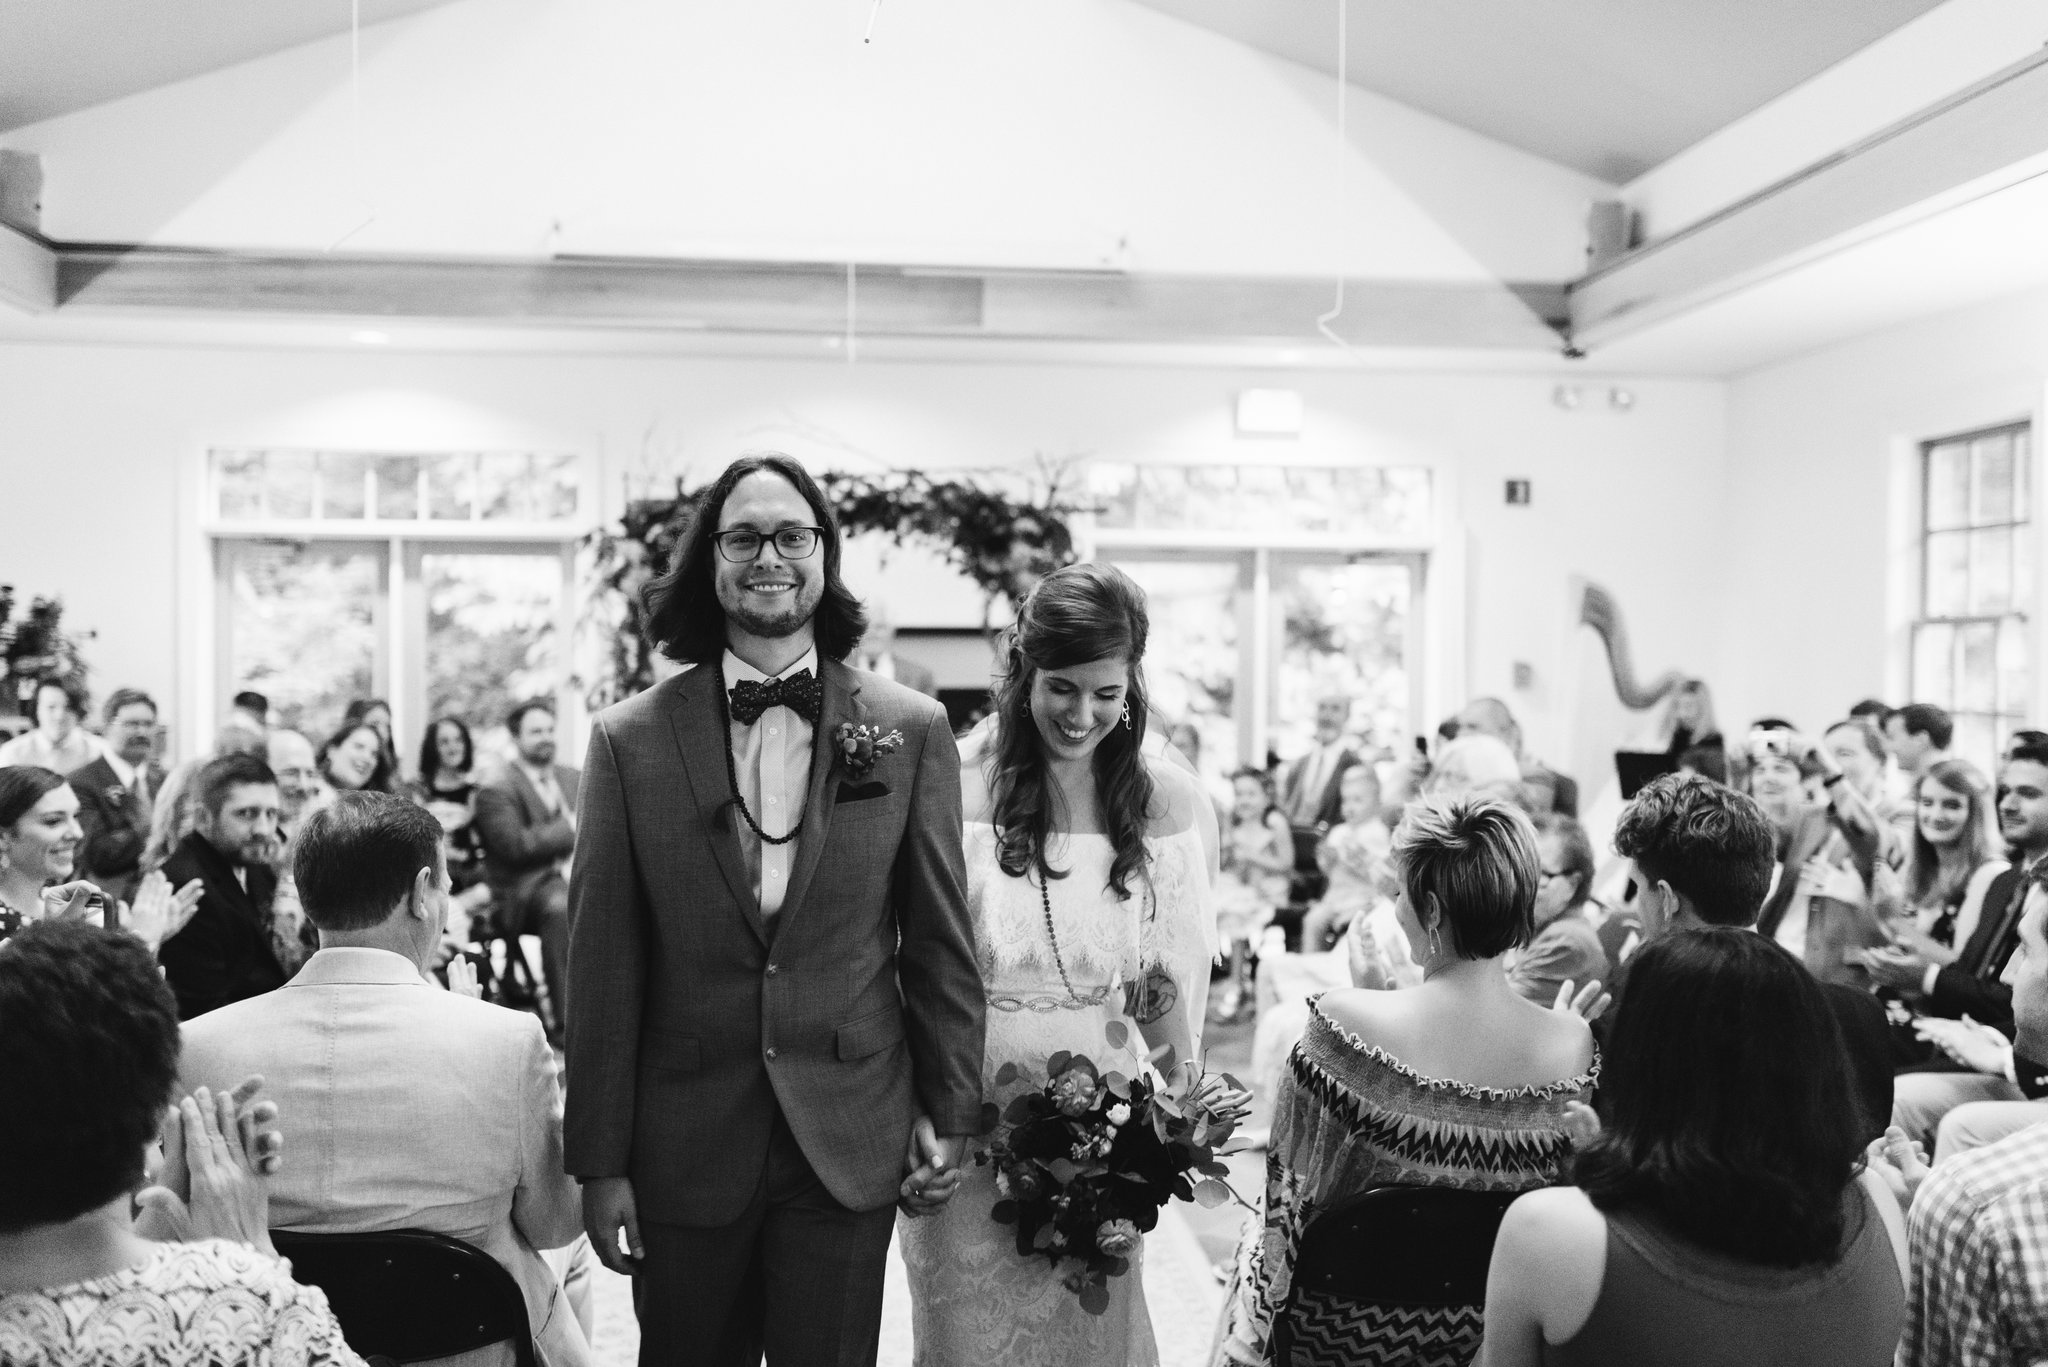  Annapolis, Quaker Wedding, Maryland Wedding Photographer, Intimate, Small Wedding, Vintage, DIY, Bride and groom Walking Down Aisle Together, Black and White Photo 